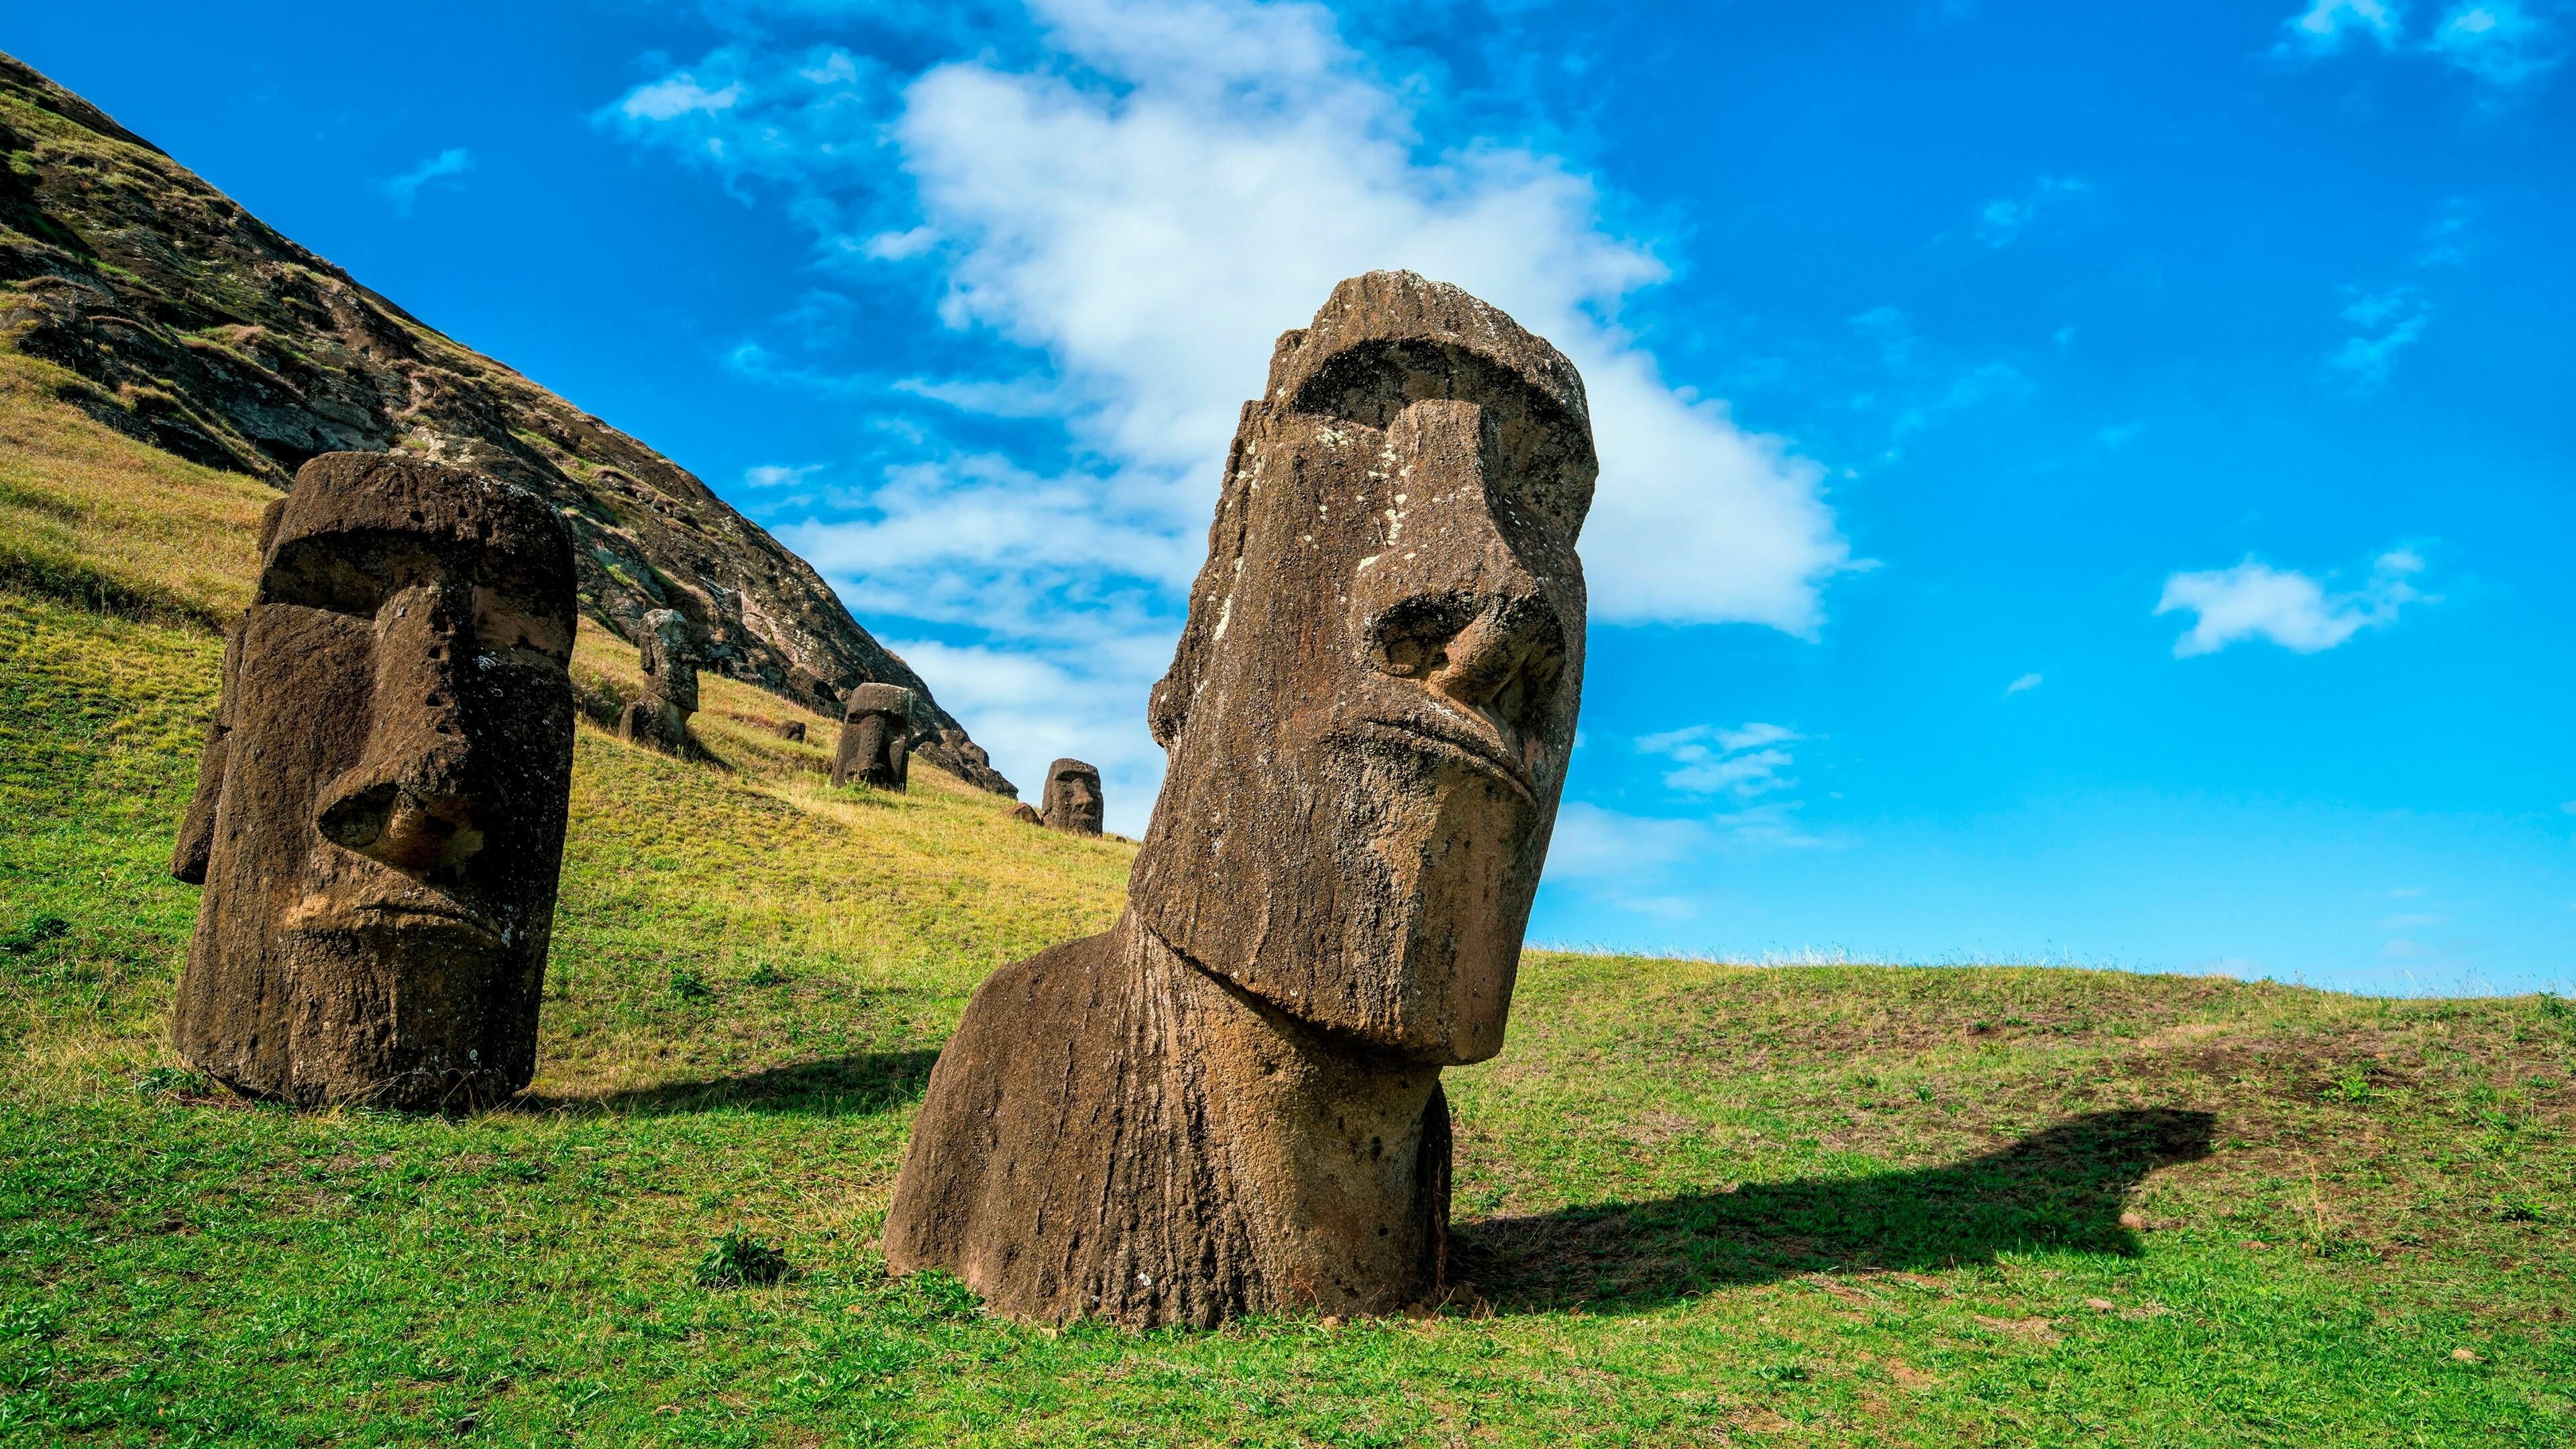 Moai: Human figures carved on Rapa Nui in eastern Polynesia between the years 1250 and 1500. 3840x2160 4K Wallpaper.